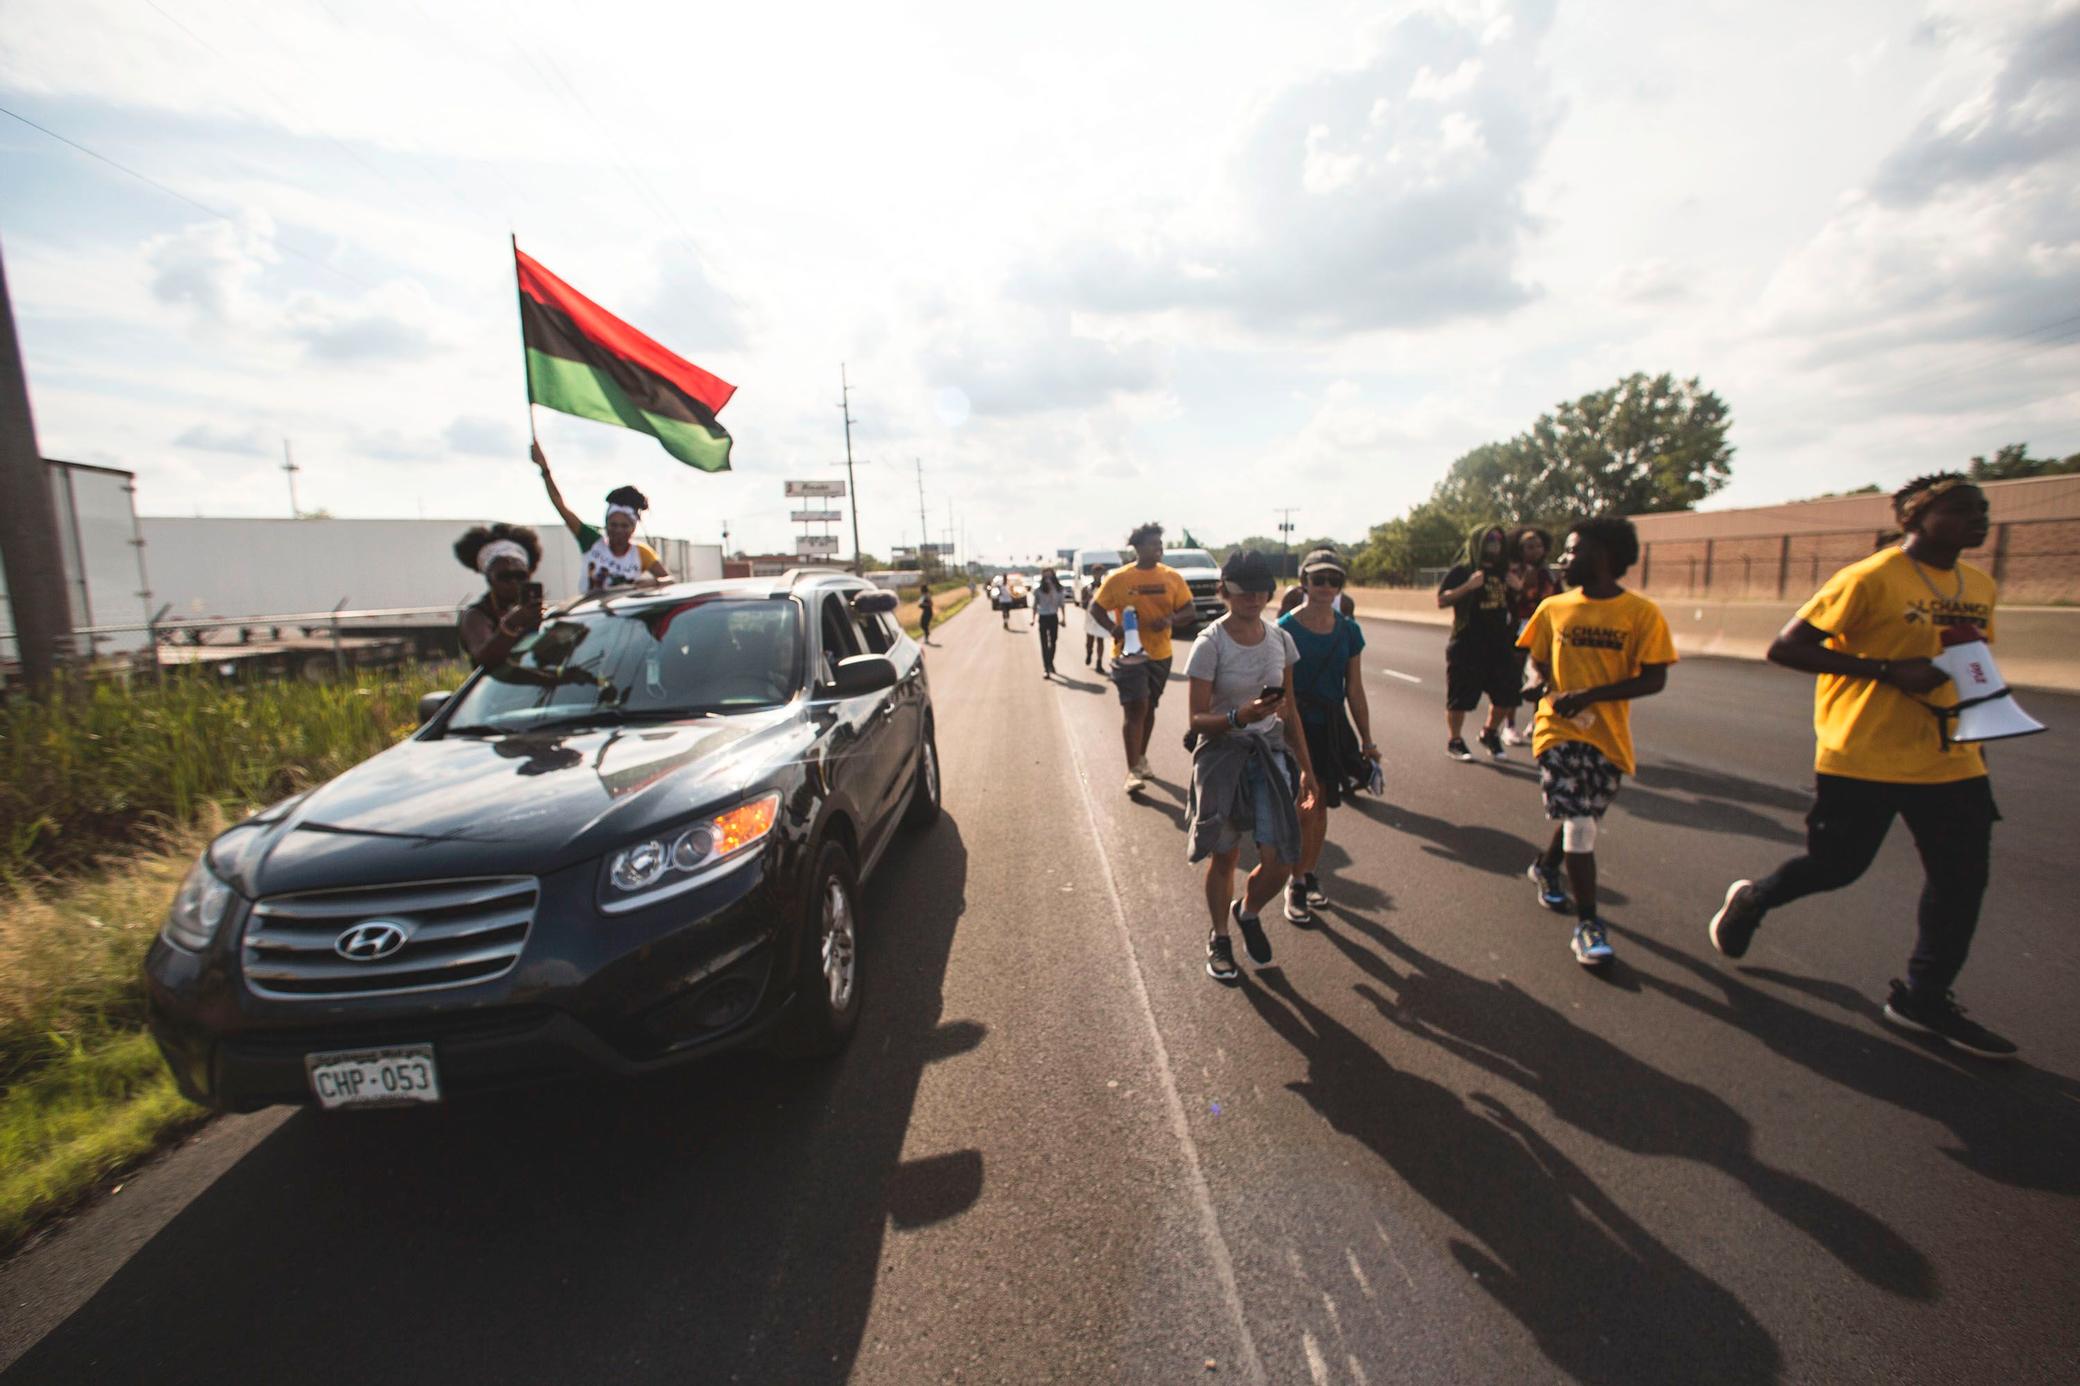 Civil rights marchers on a journey from Milwaukee to Washington, D.C.